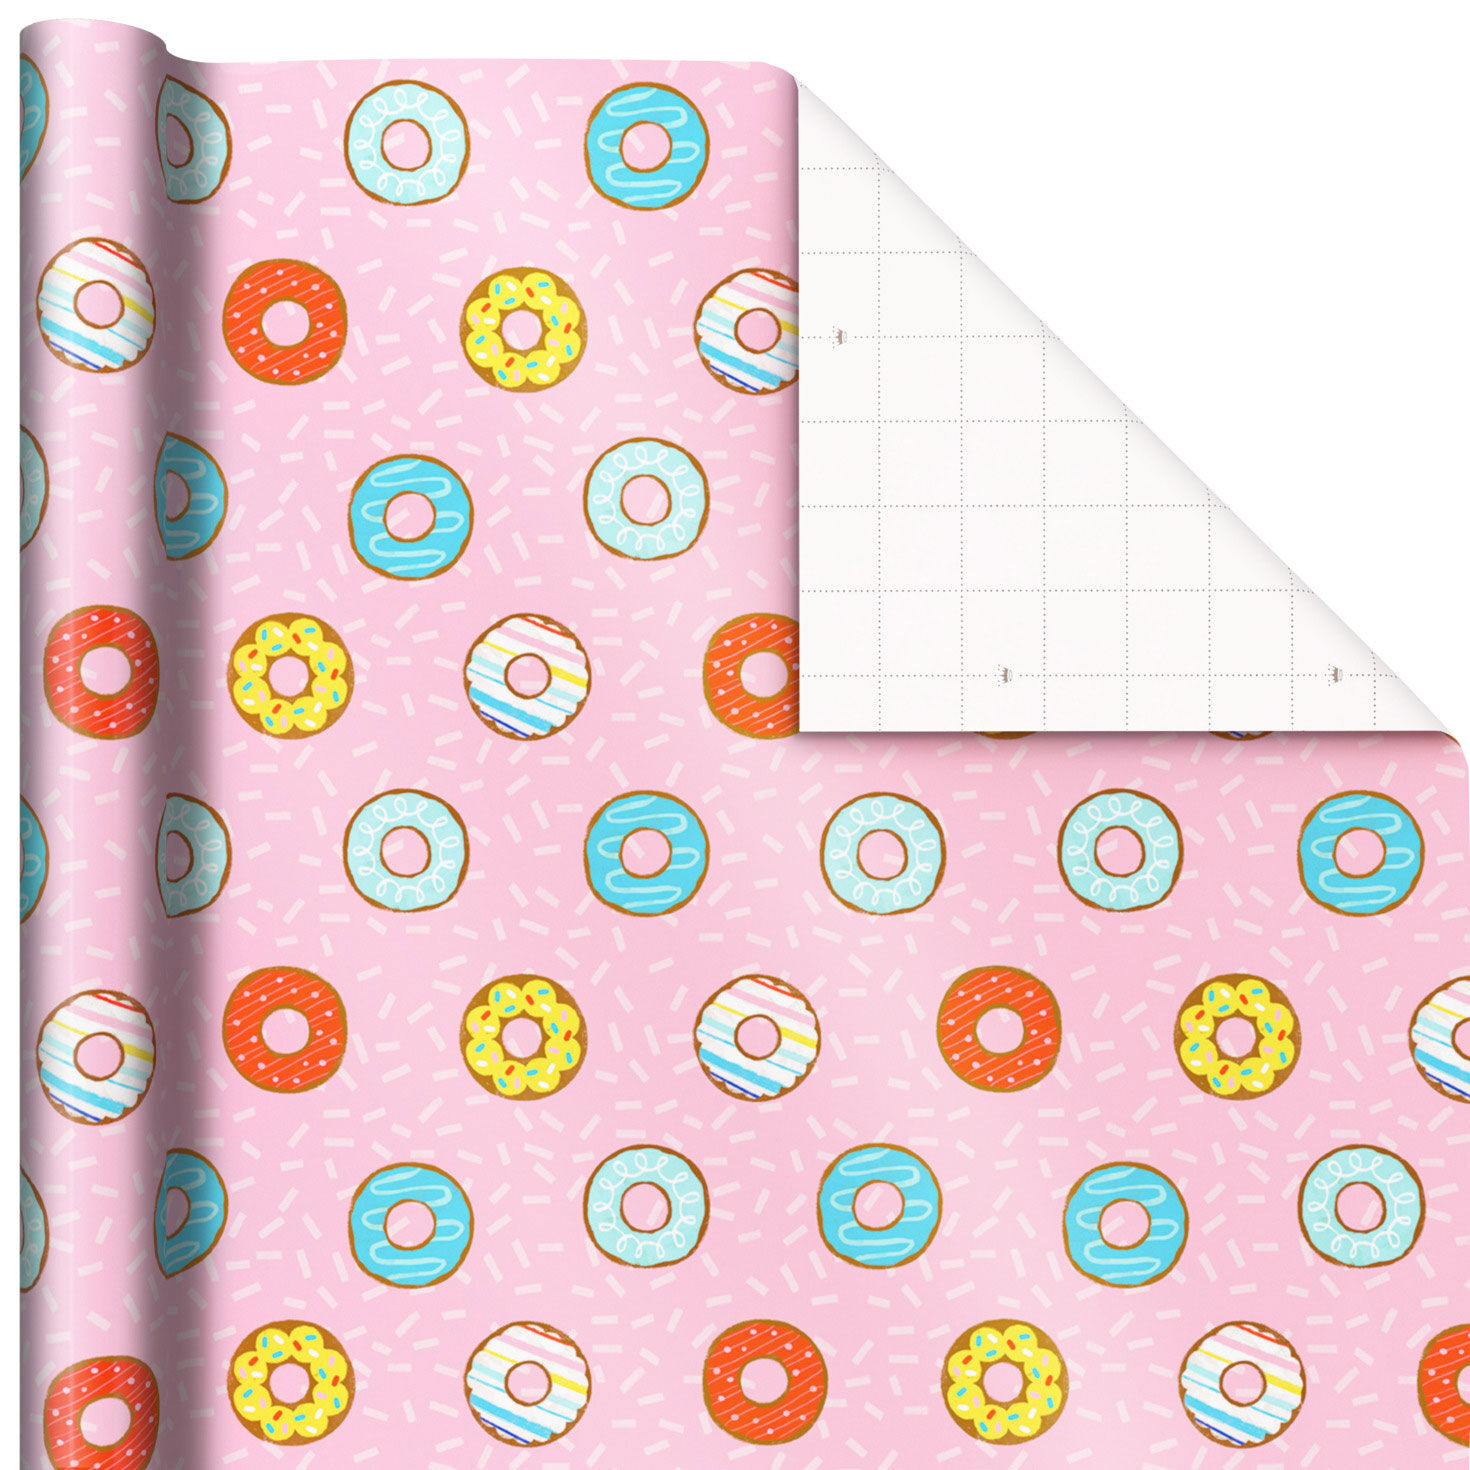 Donuts on Pink Holographic Wrapping Paper, 17.5 sq. ft. - Wrapping Paper -  Hallmark